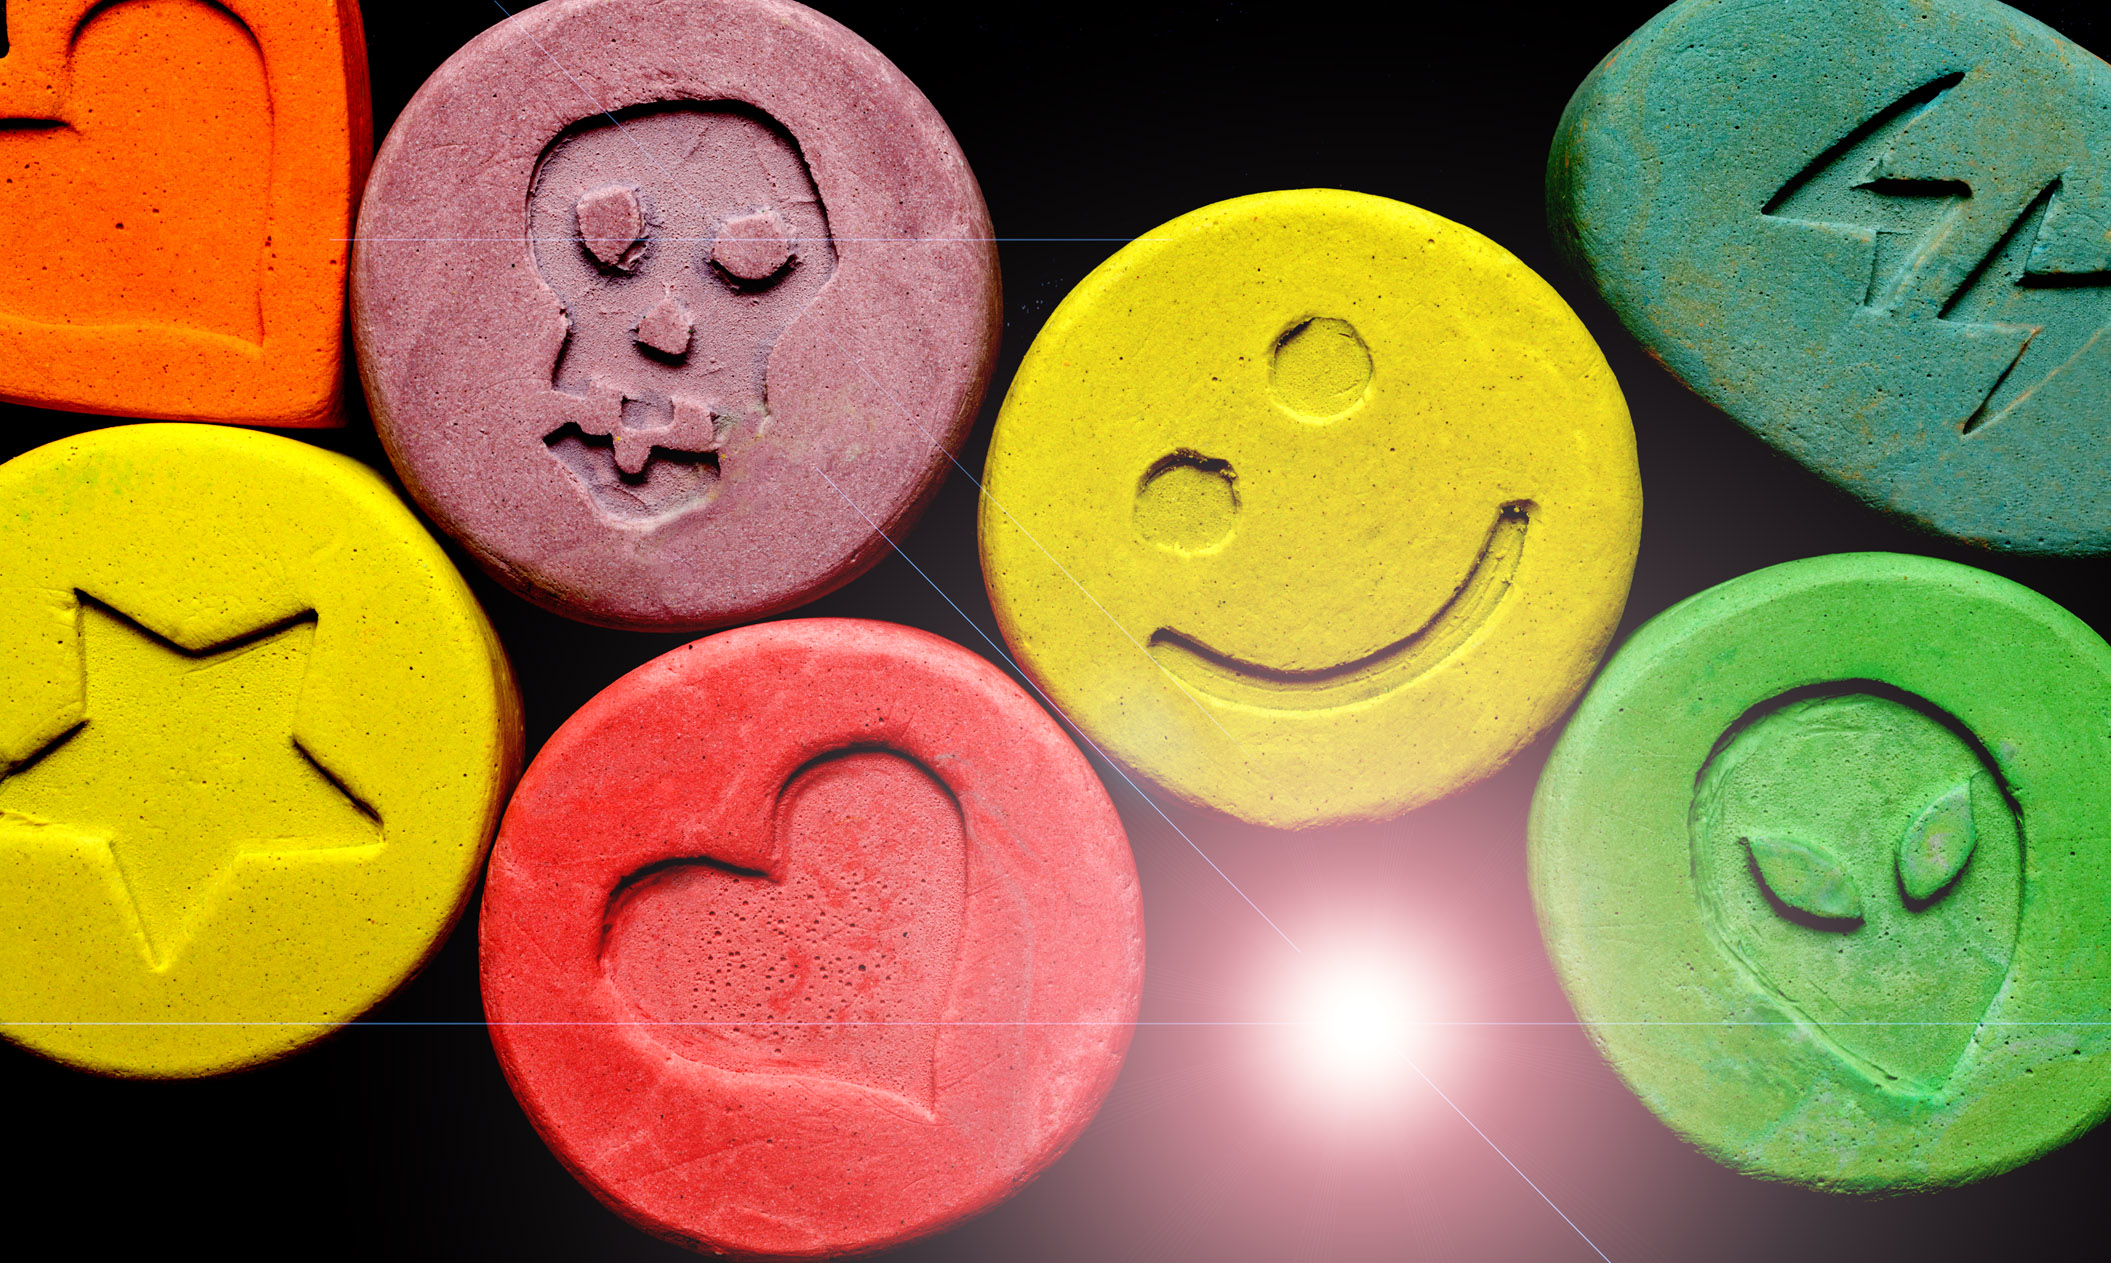 Spanish Police Seize Over 800,000 Ecstasy Pills And More